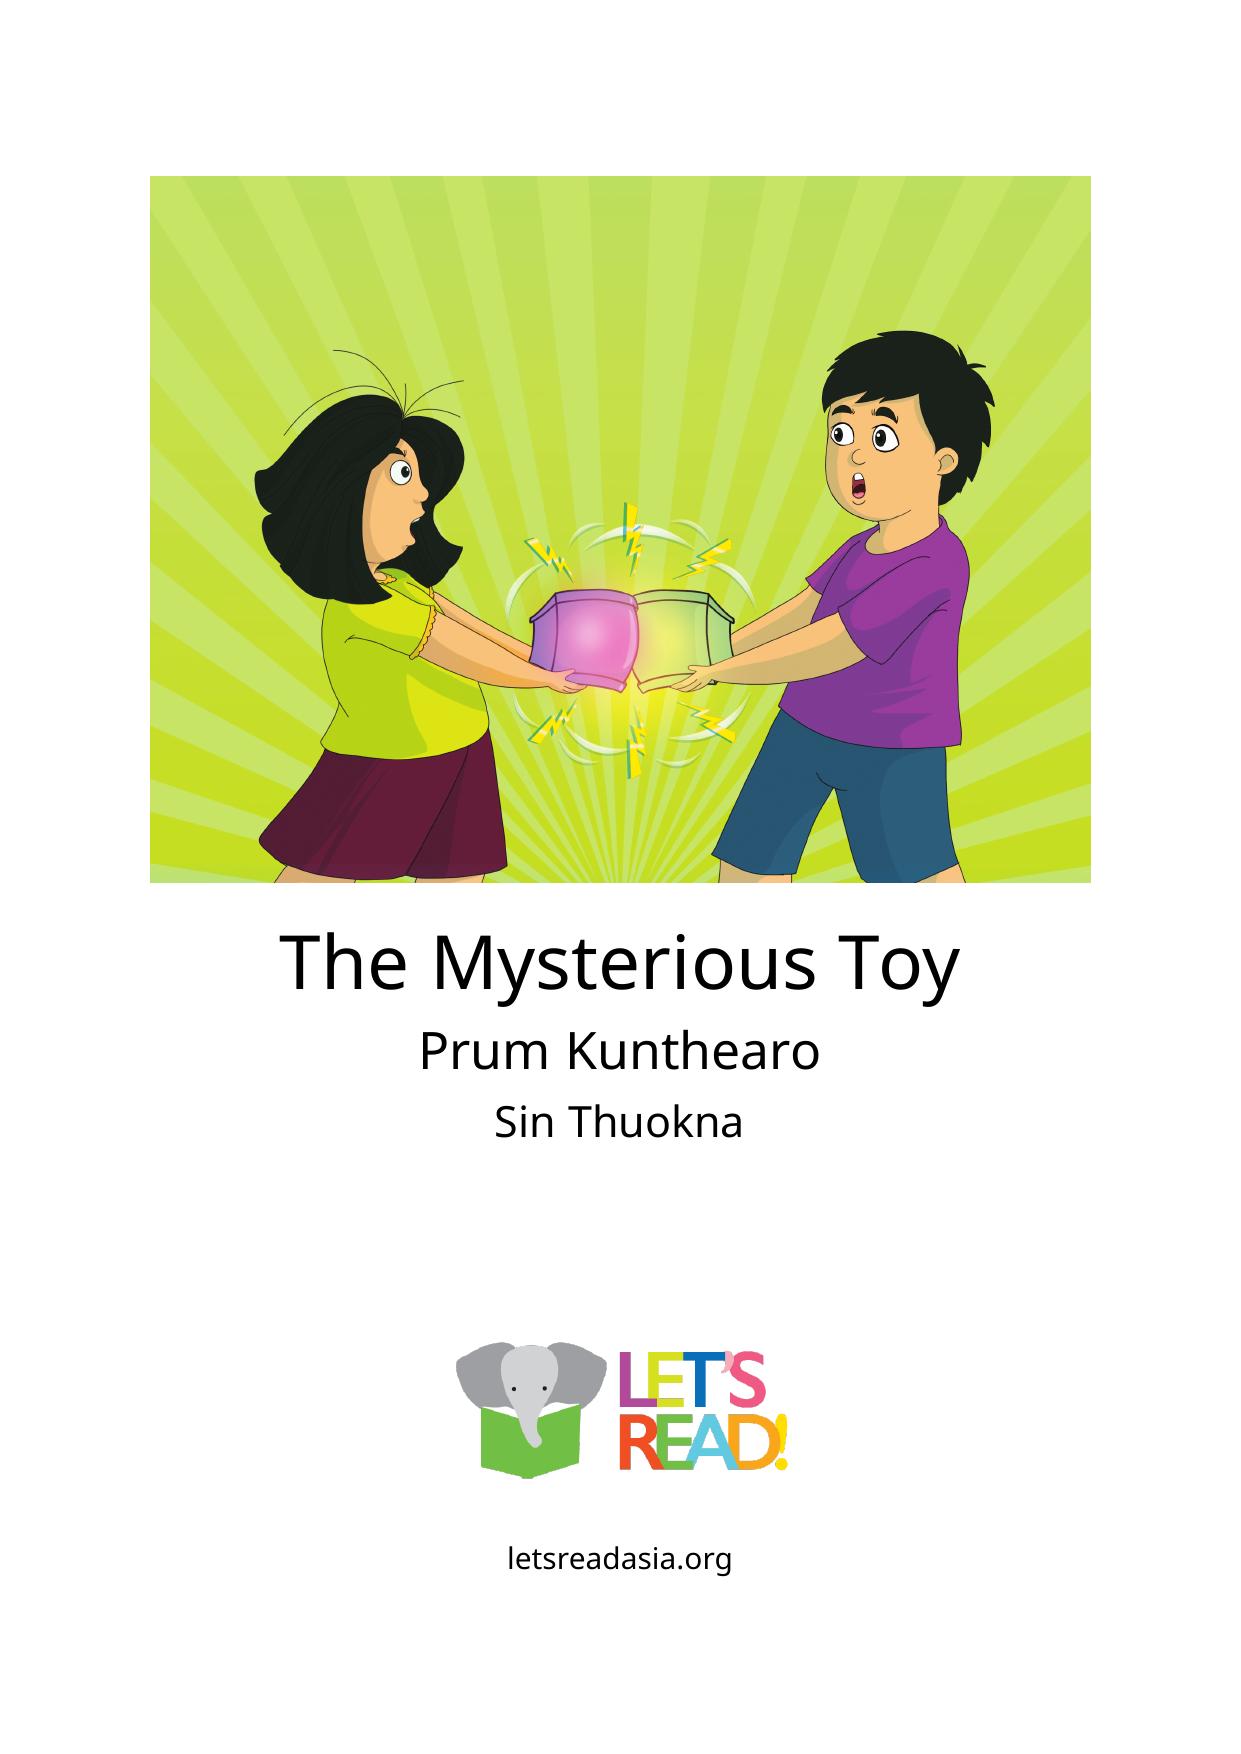 The Mysterious Toy